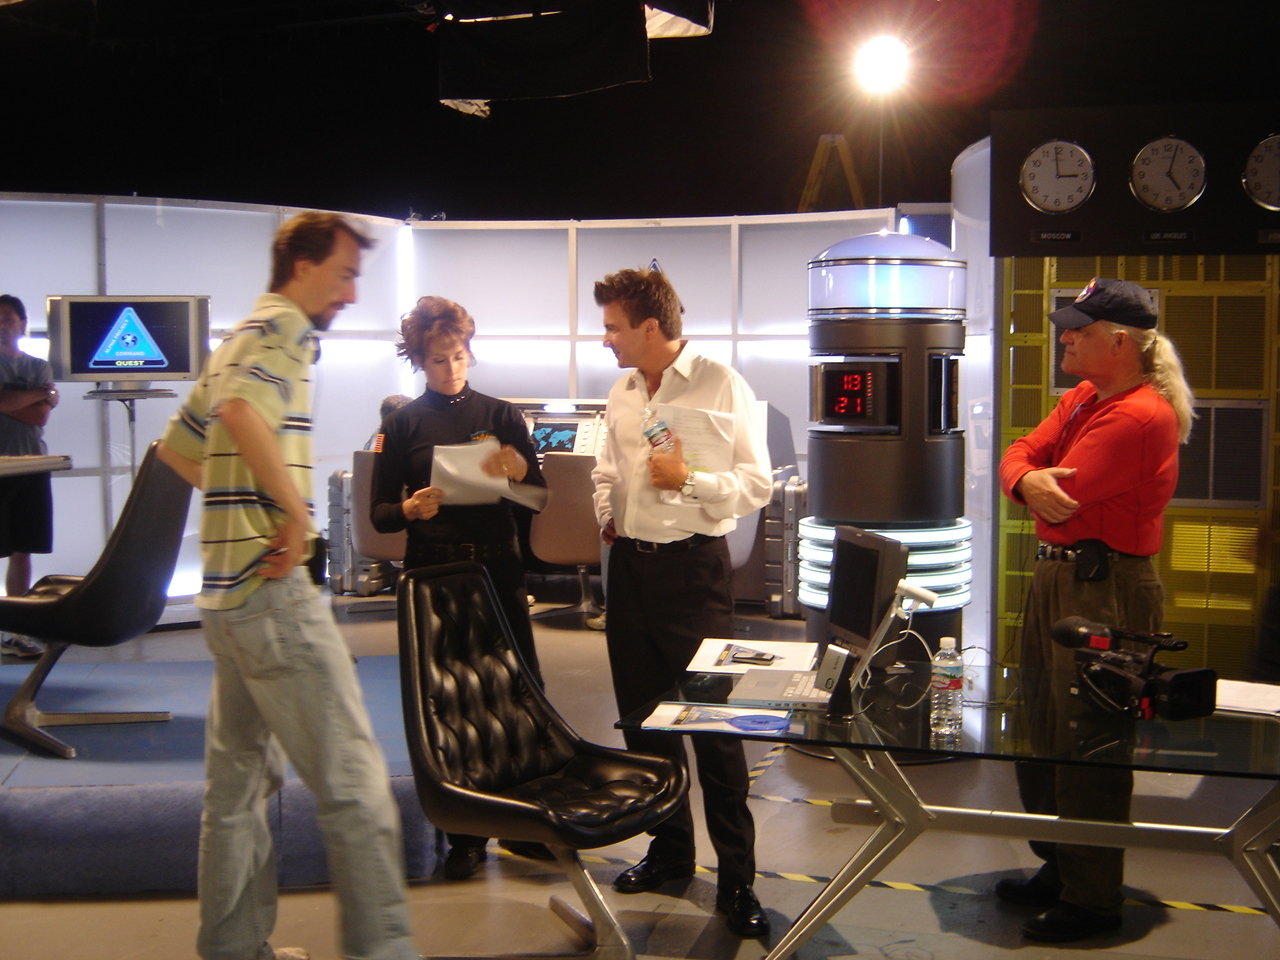 Tim Lowry, Christine Fry, Jack Maxwell,Dean Andre on the set of Quest